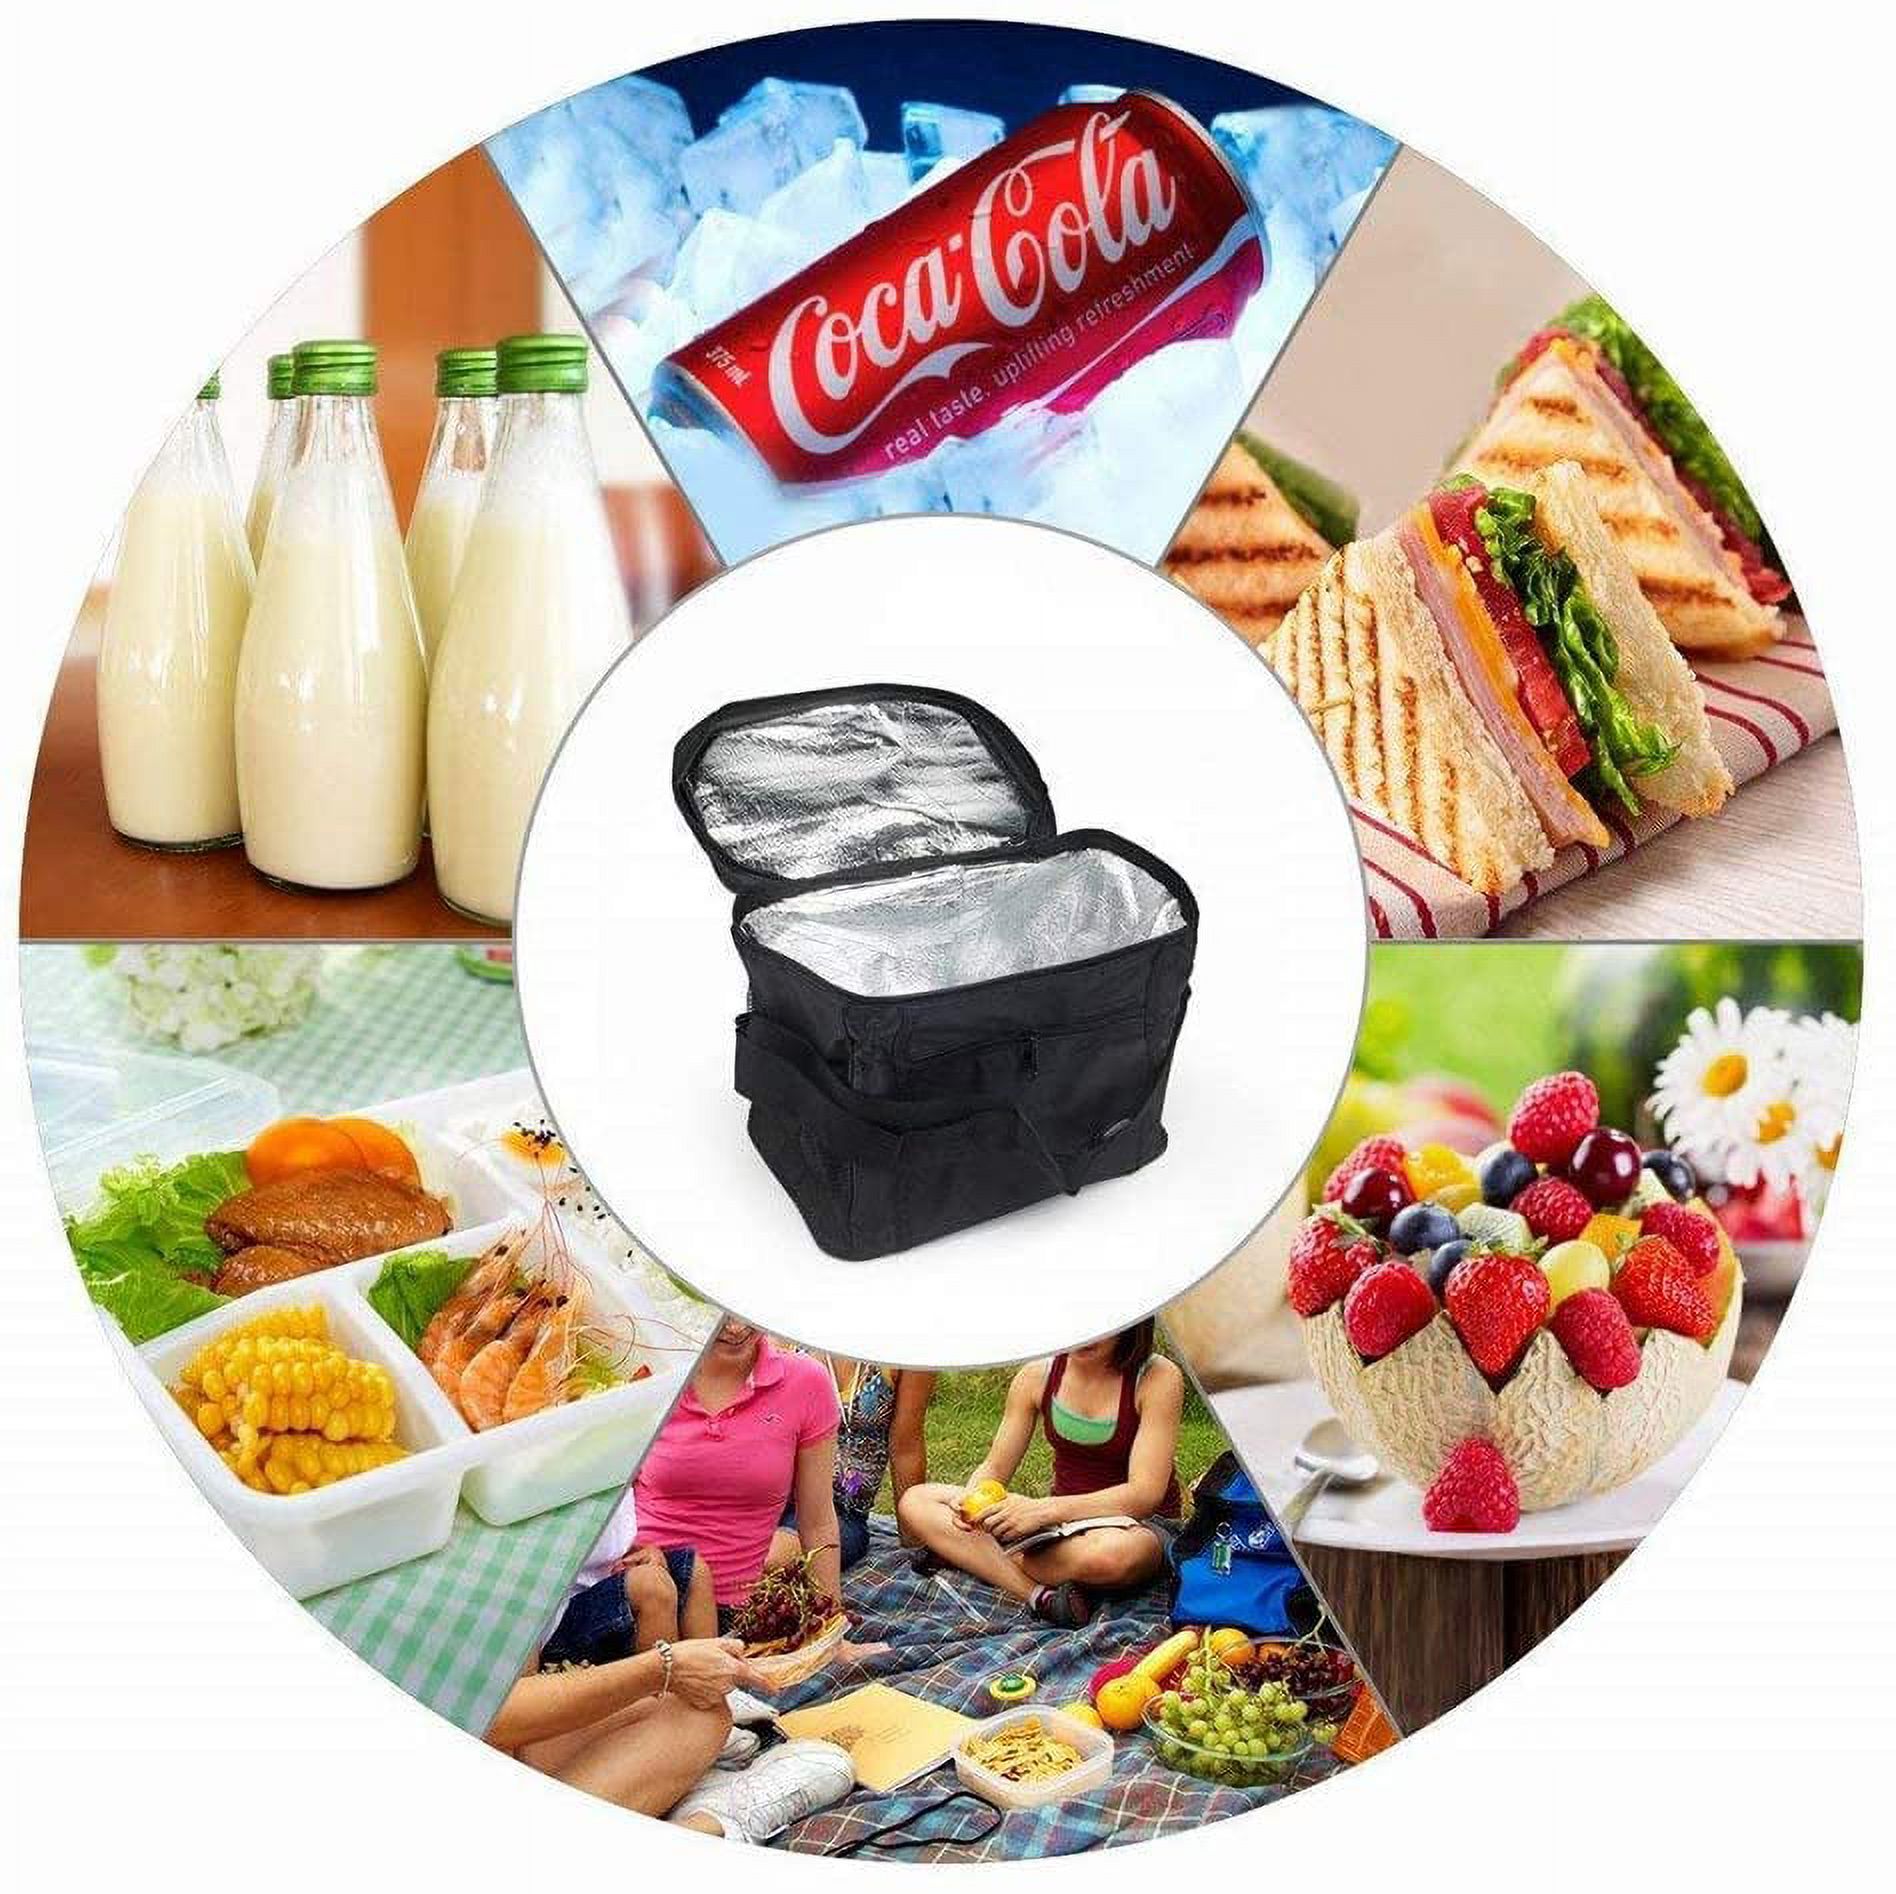 acdanc Foldable cooler bag, picnic bag, cooler bag, lunch bag, ice bag, ice bag, mini foldable cooler bag, mini cooler bags, small foldable thermal bag, insulated lunch bag, cooler for picnic - image 5 of 6